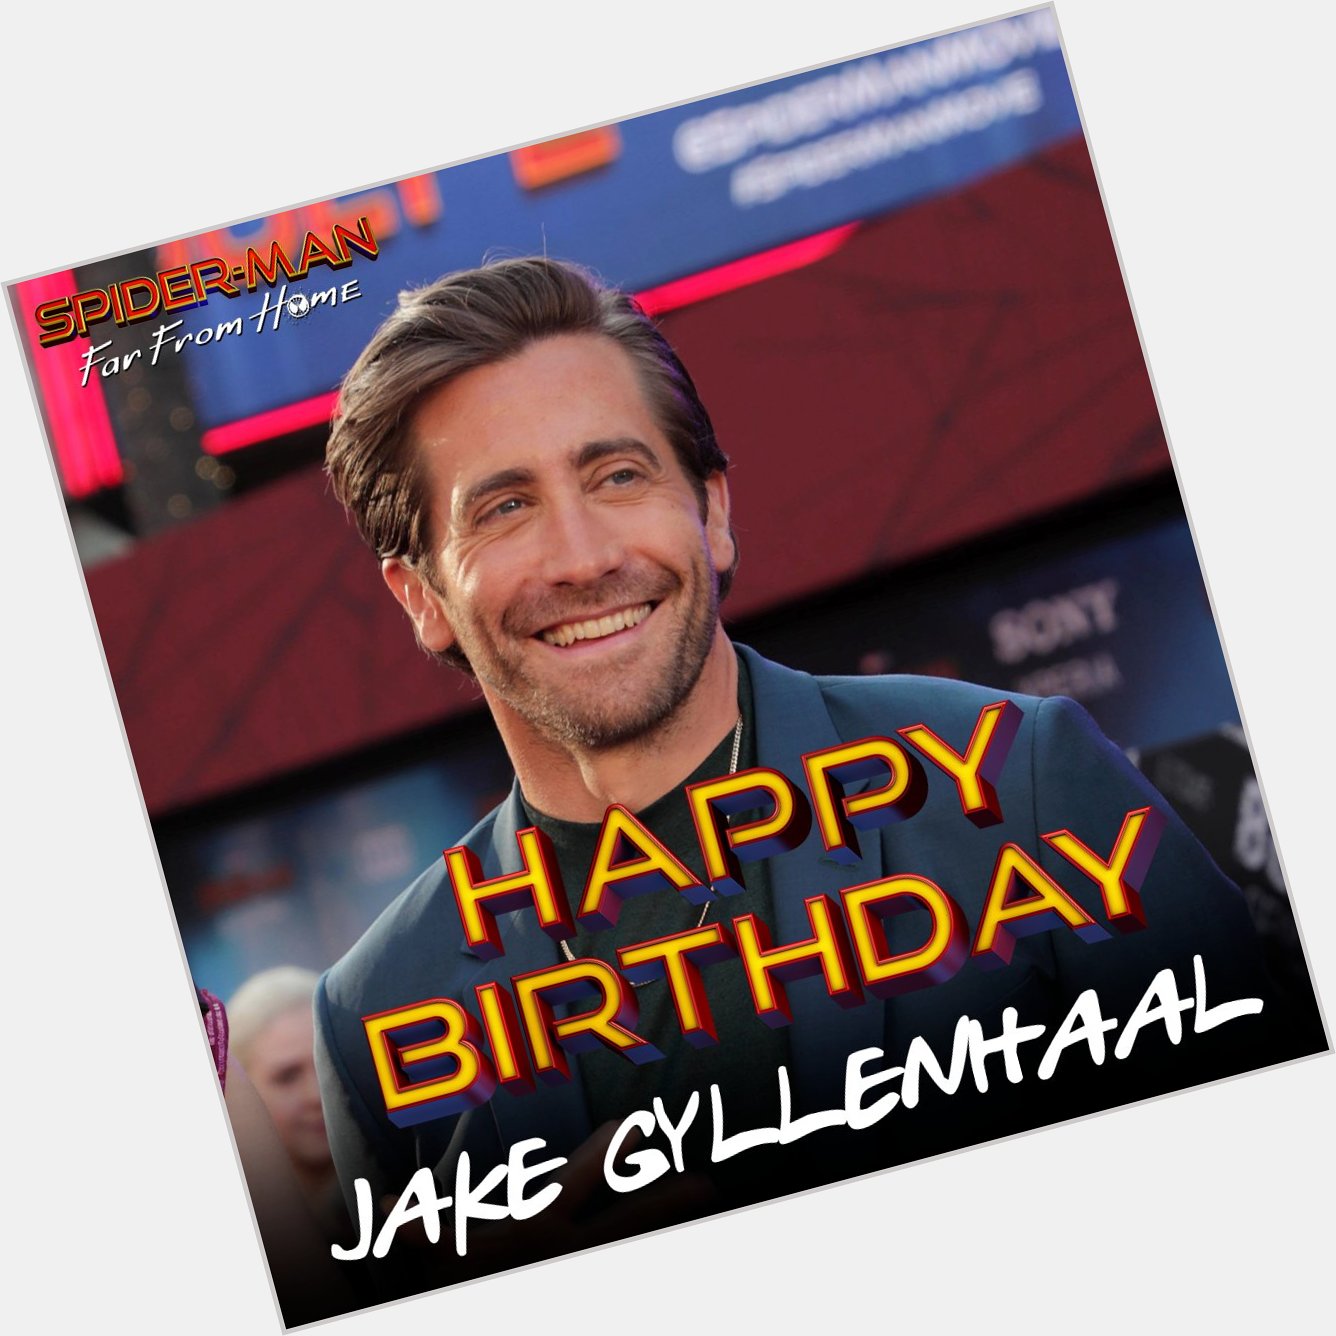 Happy birthday to our favorite man of mystery, Jake Gyllenhaal! 